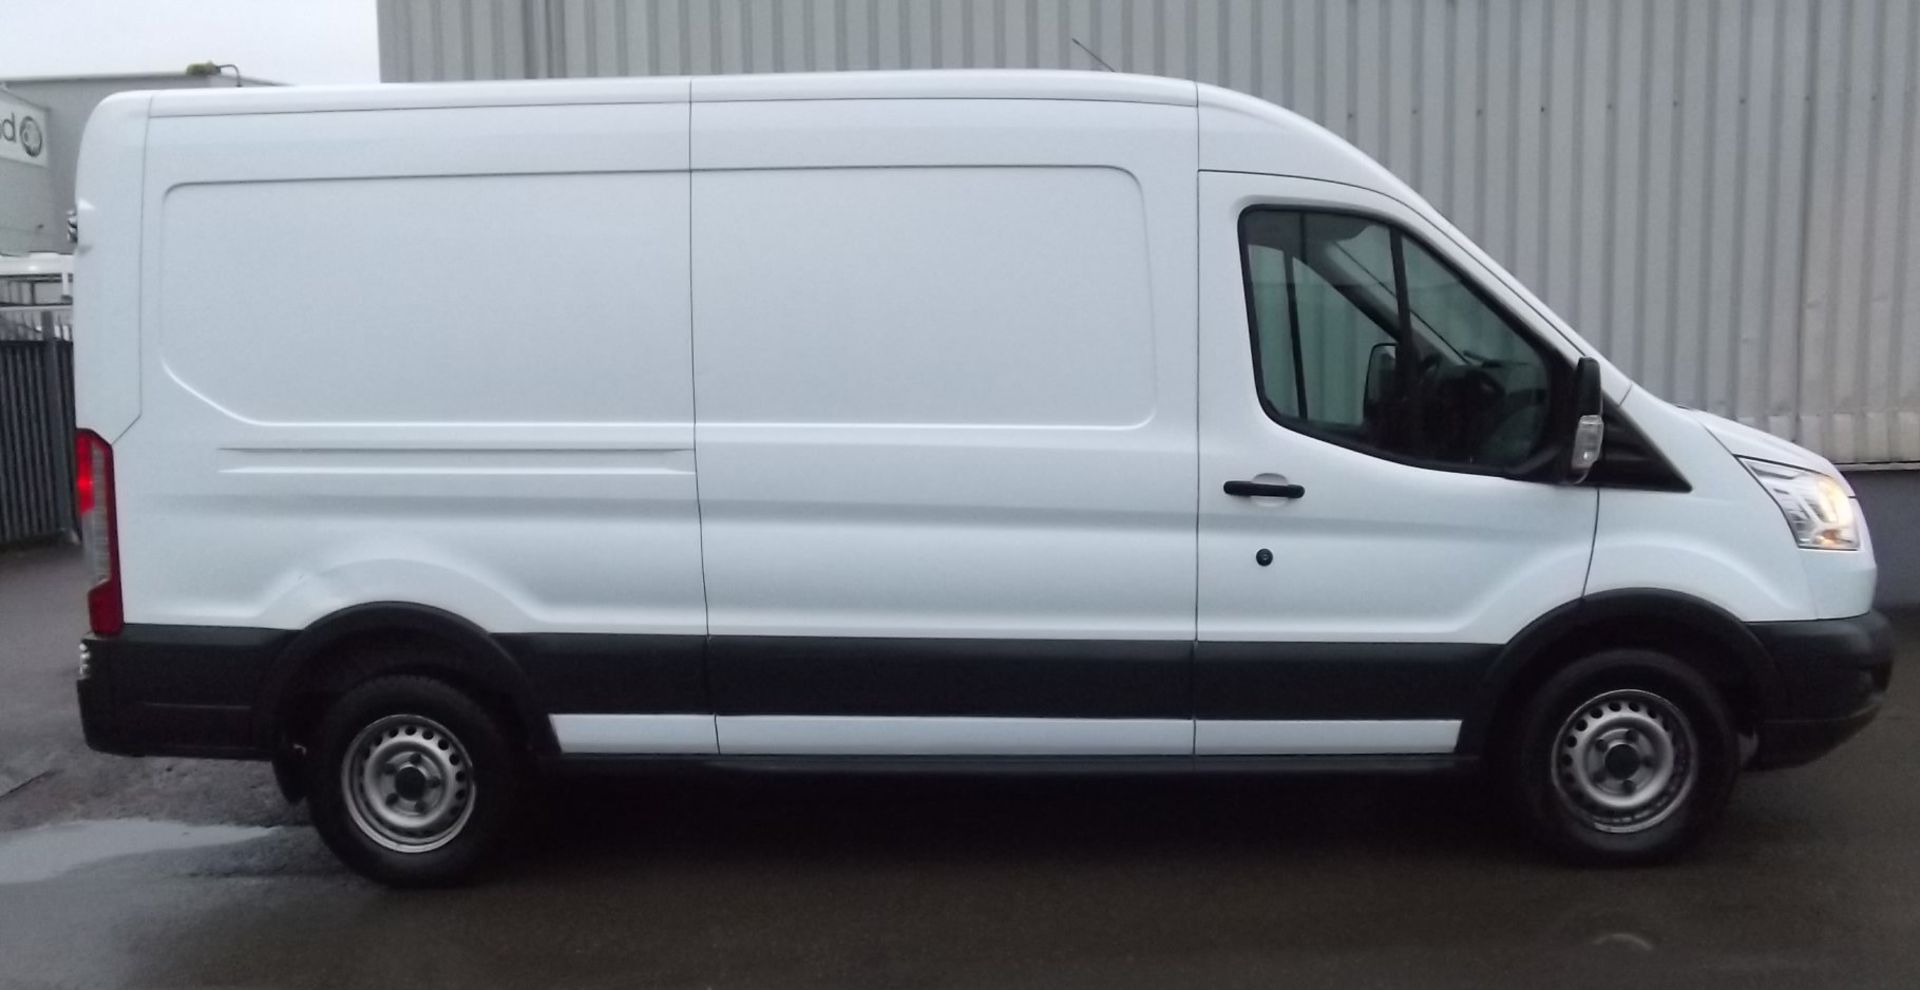 2016 Ford Transit 350 2.2 TDCi 125ps H2L3 Panel Van - CL505 - Location: Corby, Northamptonshire - Image 14 of 15